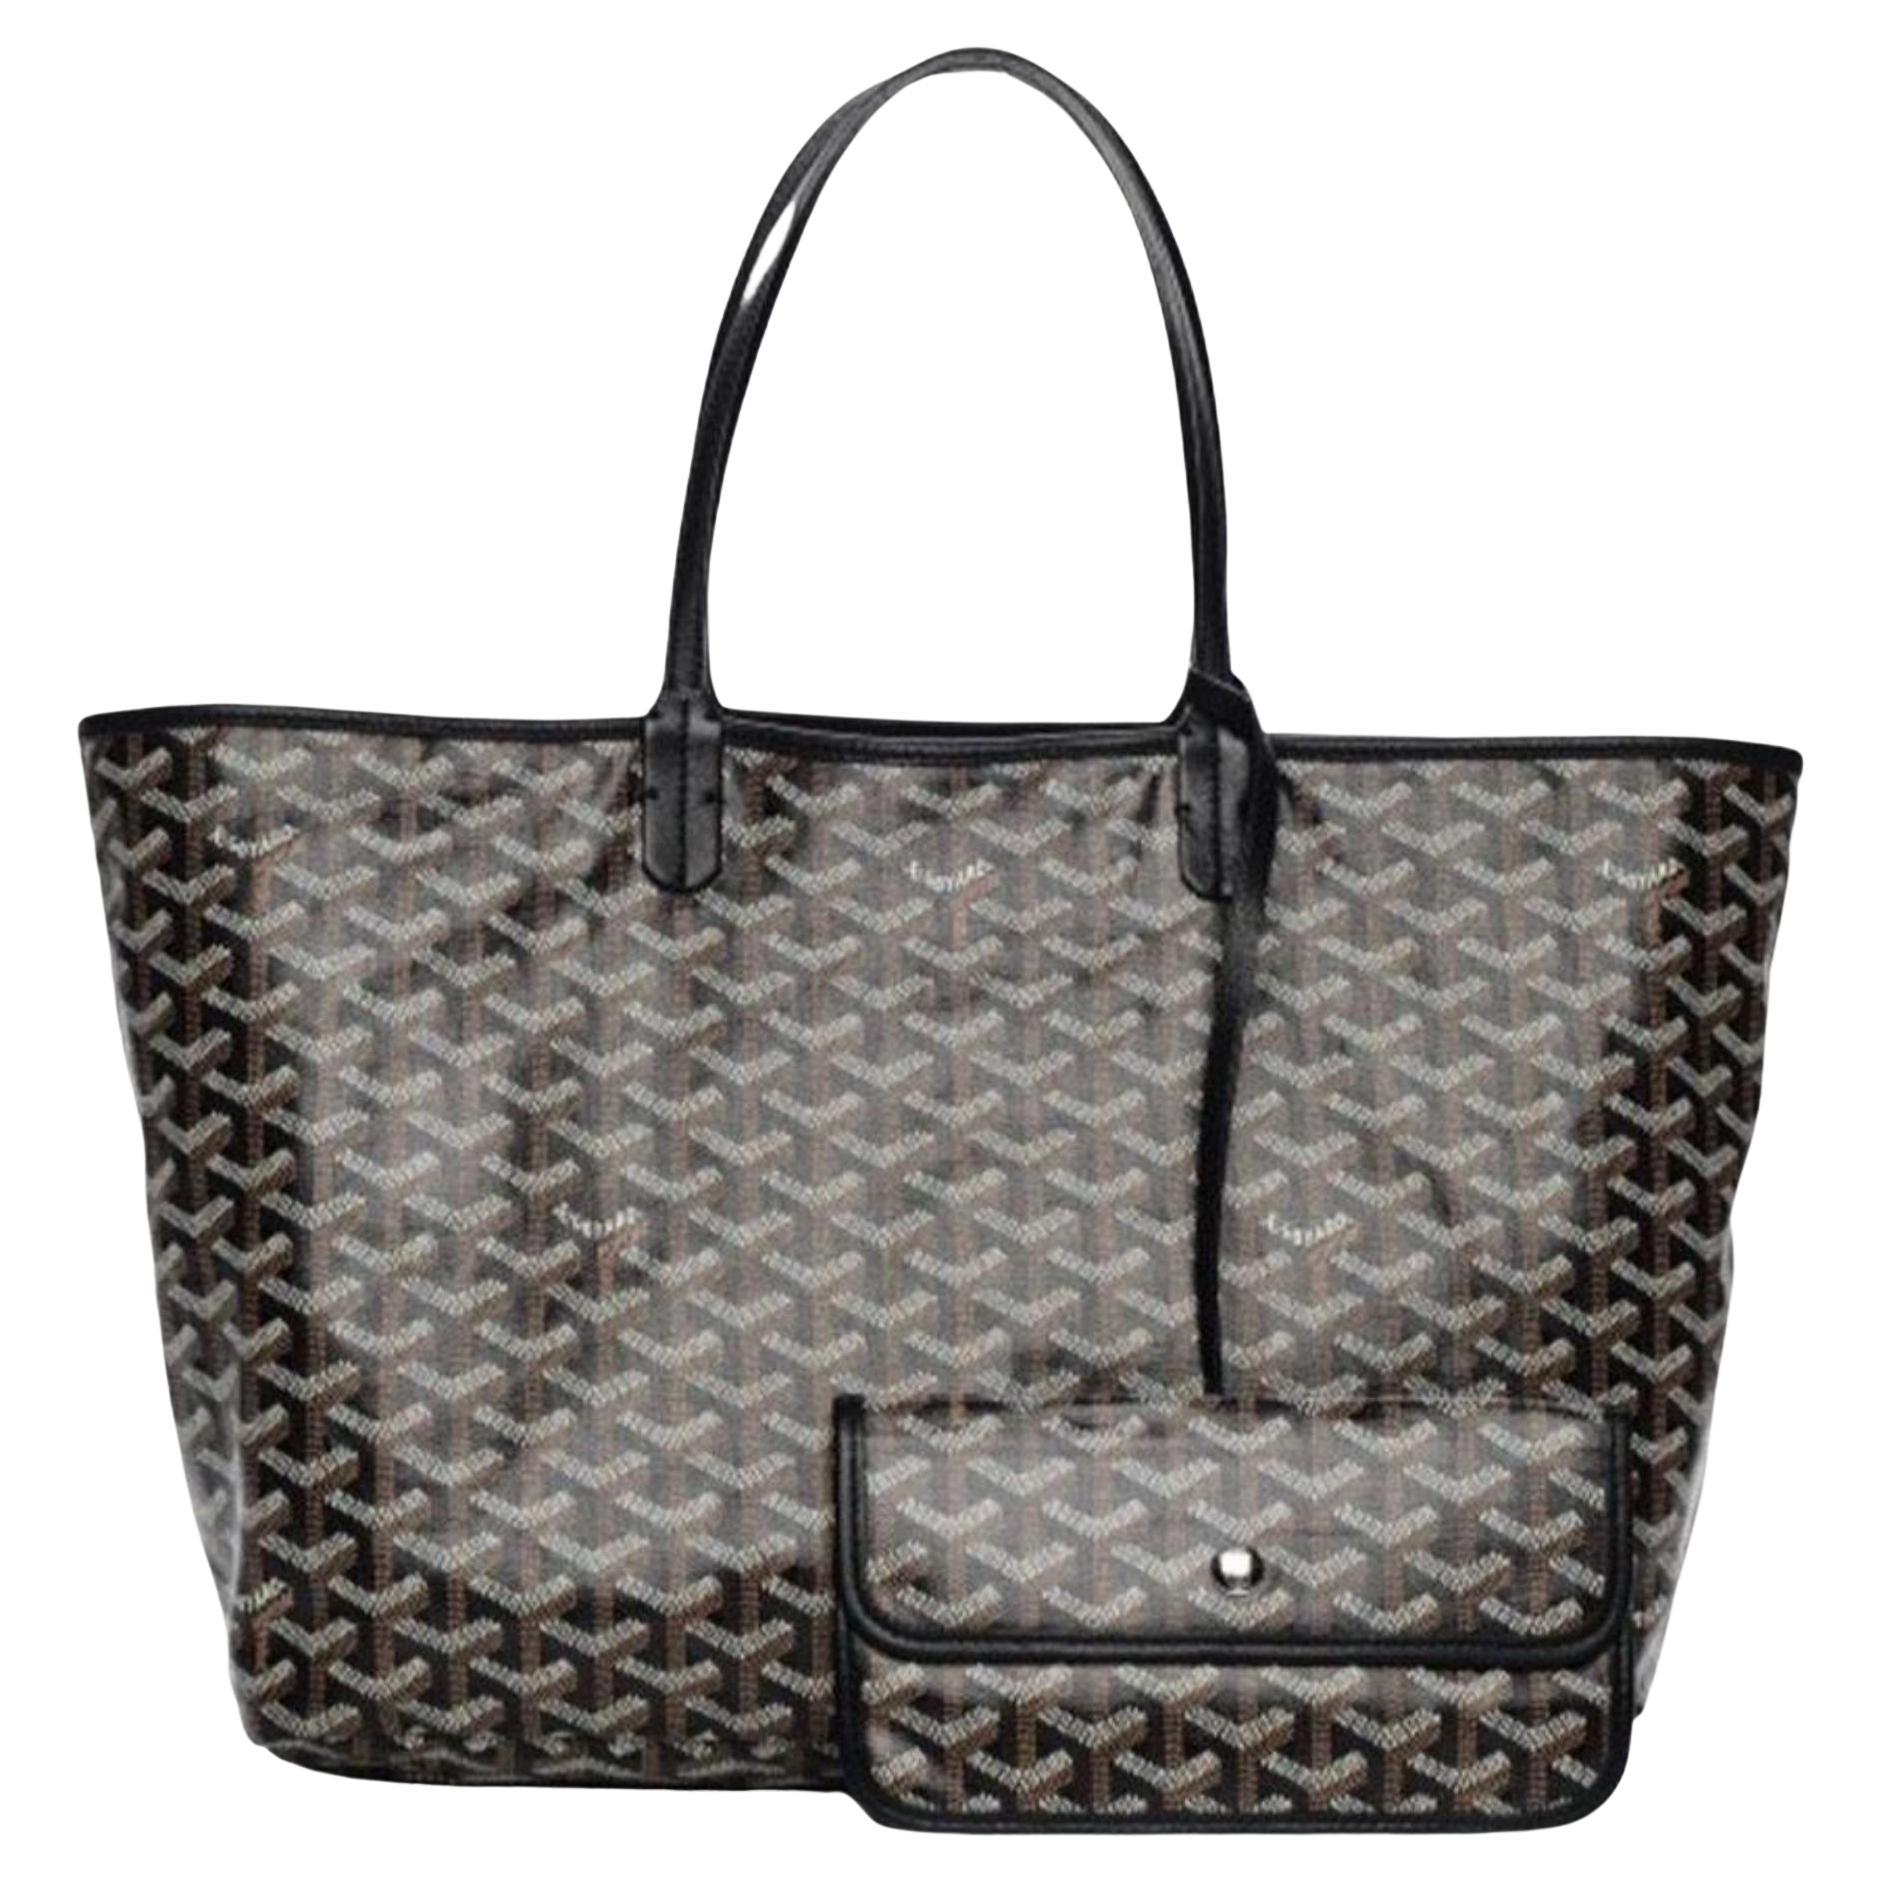 Goyard Black Chevron St Louis PM Tote Bag with Pouch 1223gy50 For